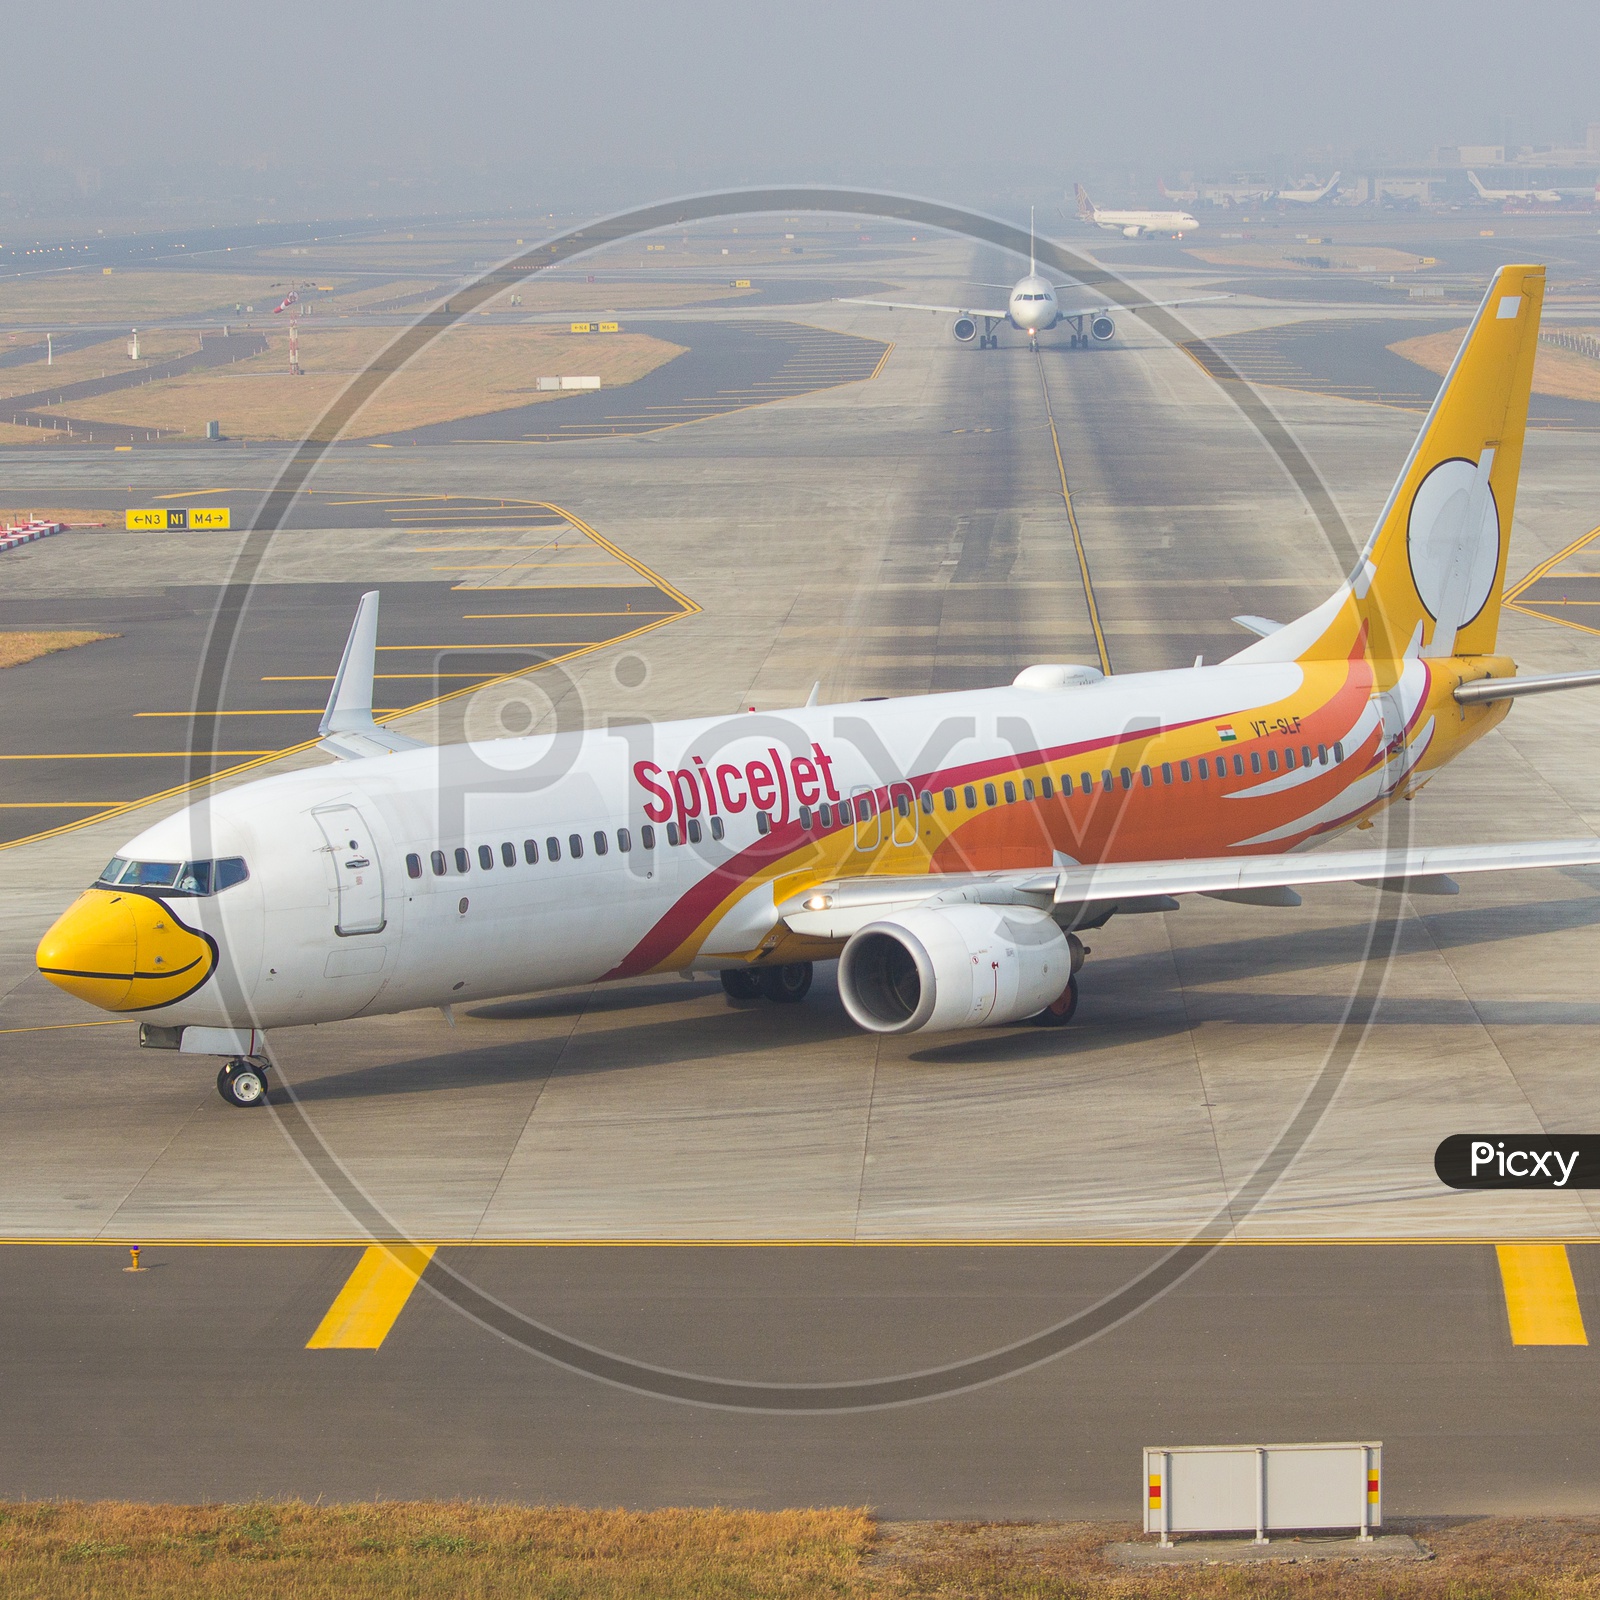 Leased from Nok air operated by Spicejet B737.